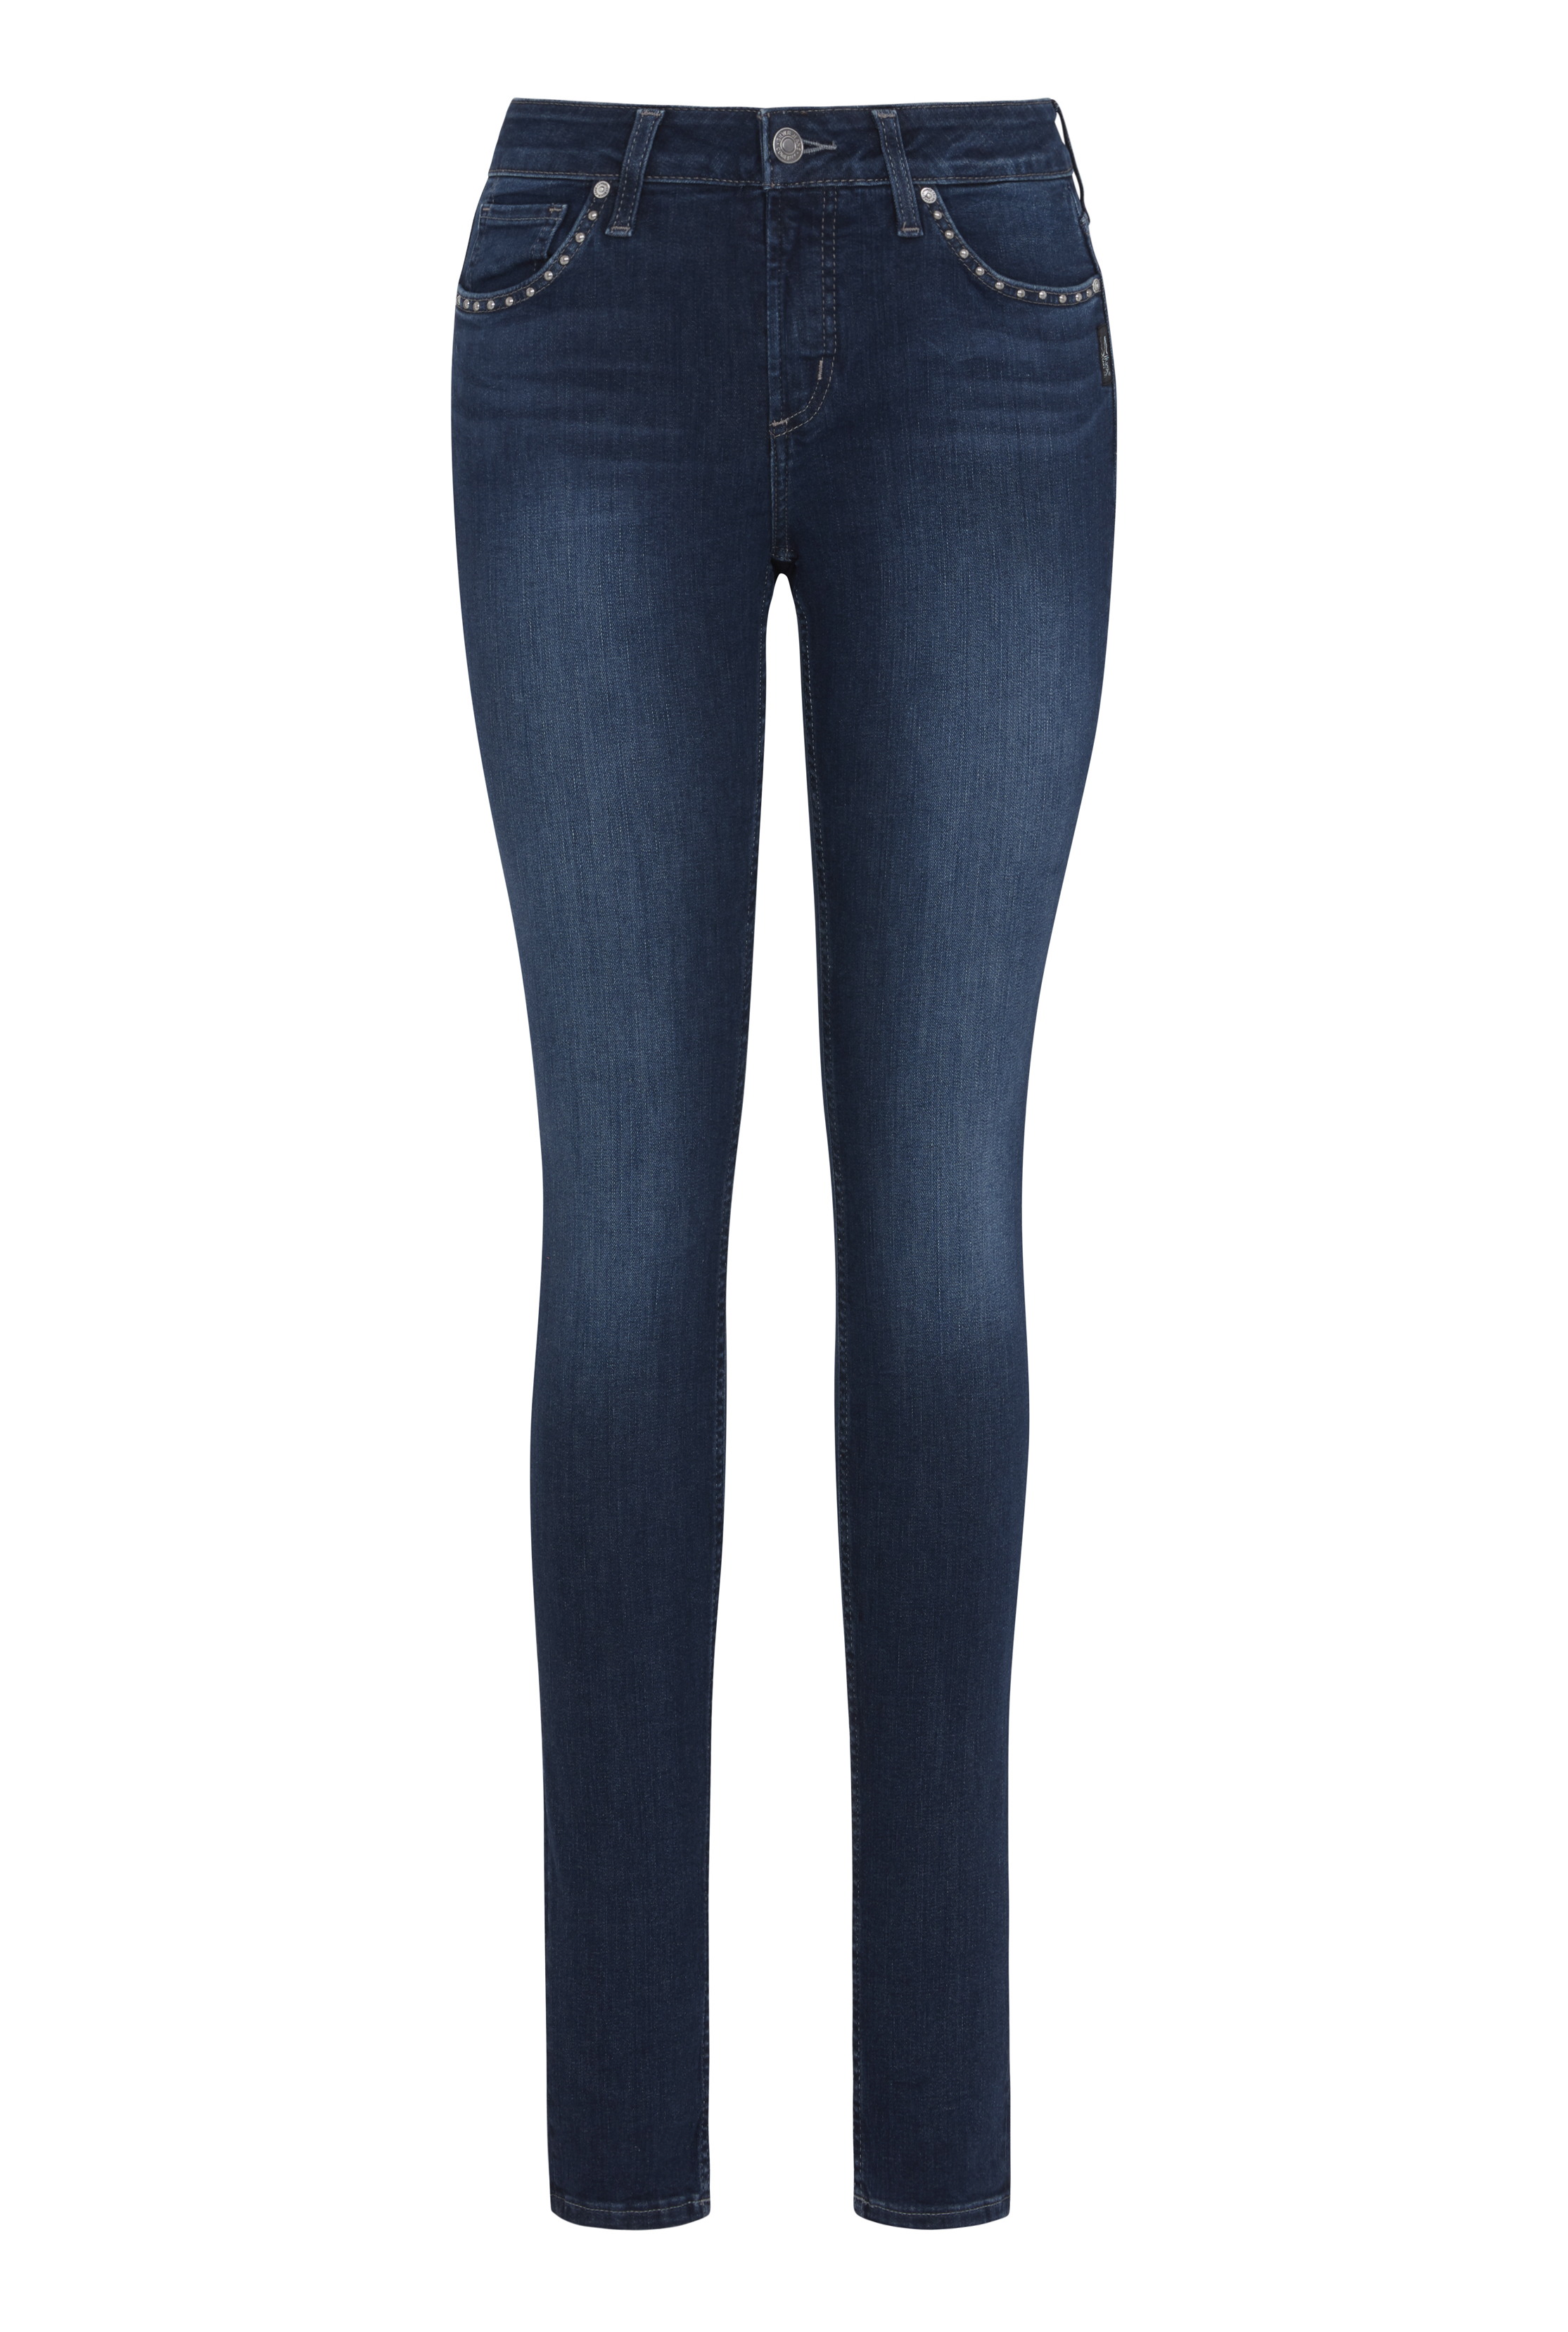 Silver Jeans Avery Skinny Studded Jean | Long Tall Sally